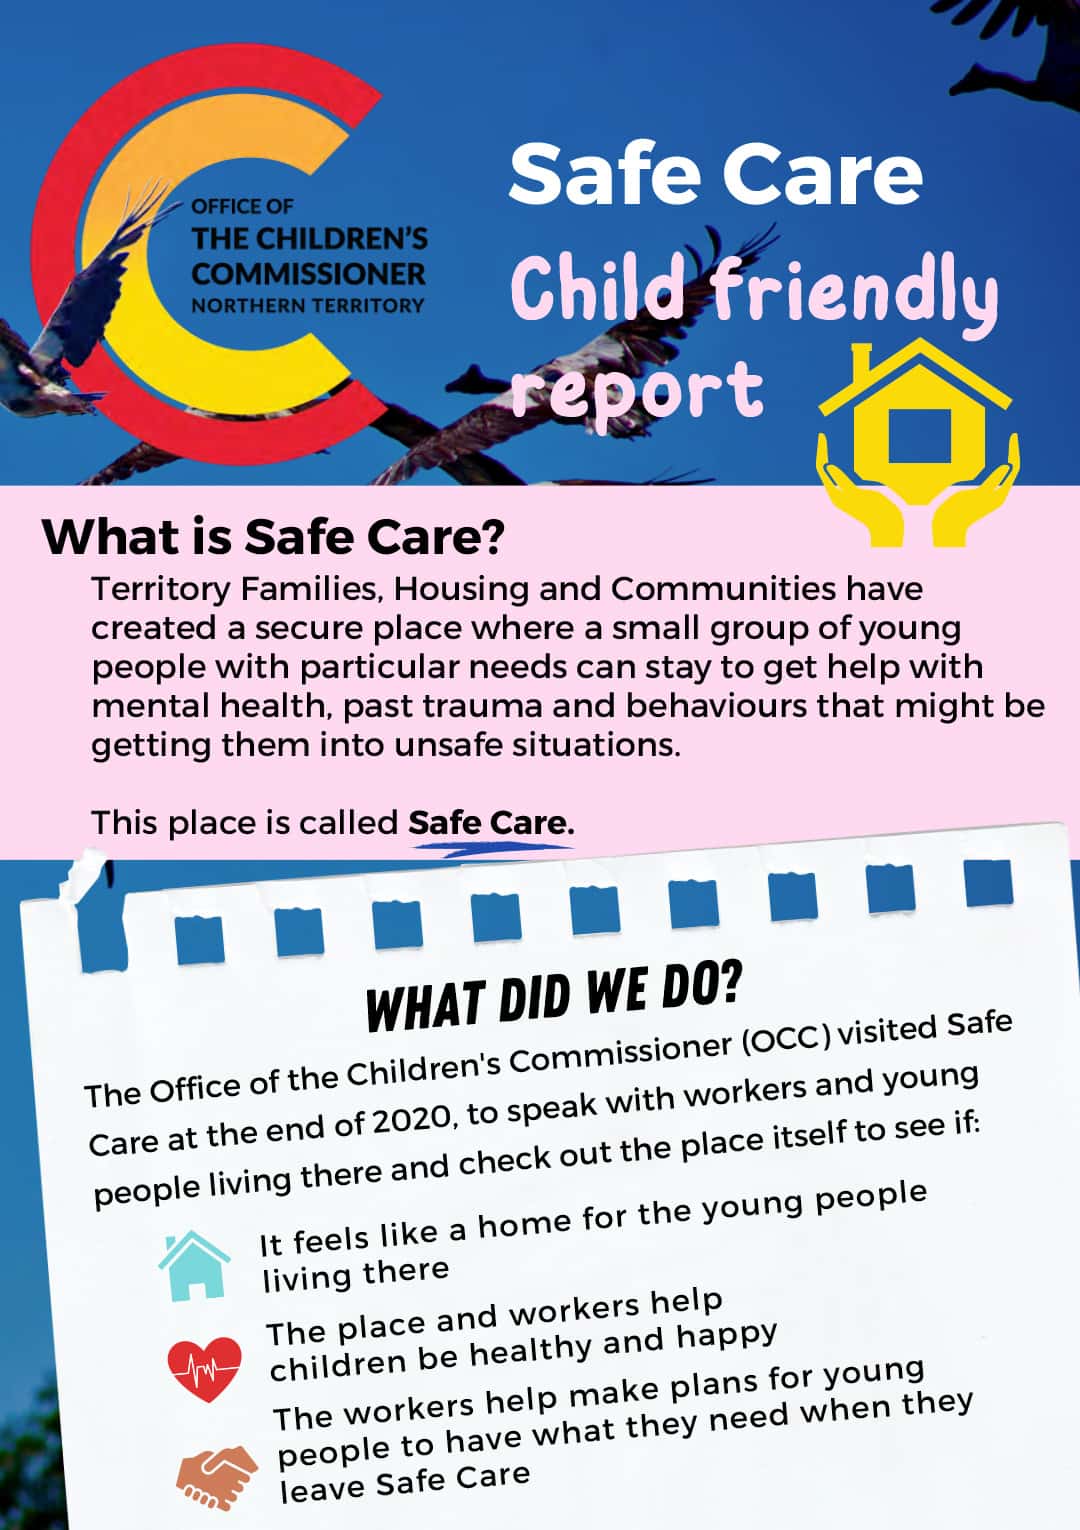 Safe Care Child Friendly Report